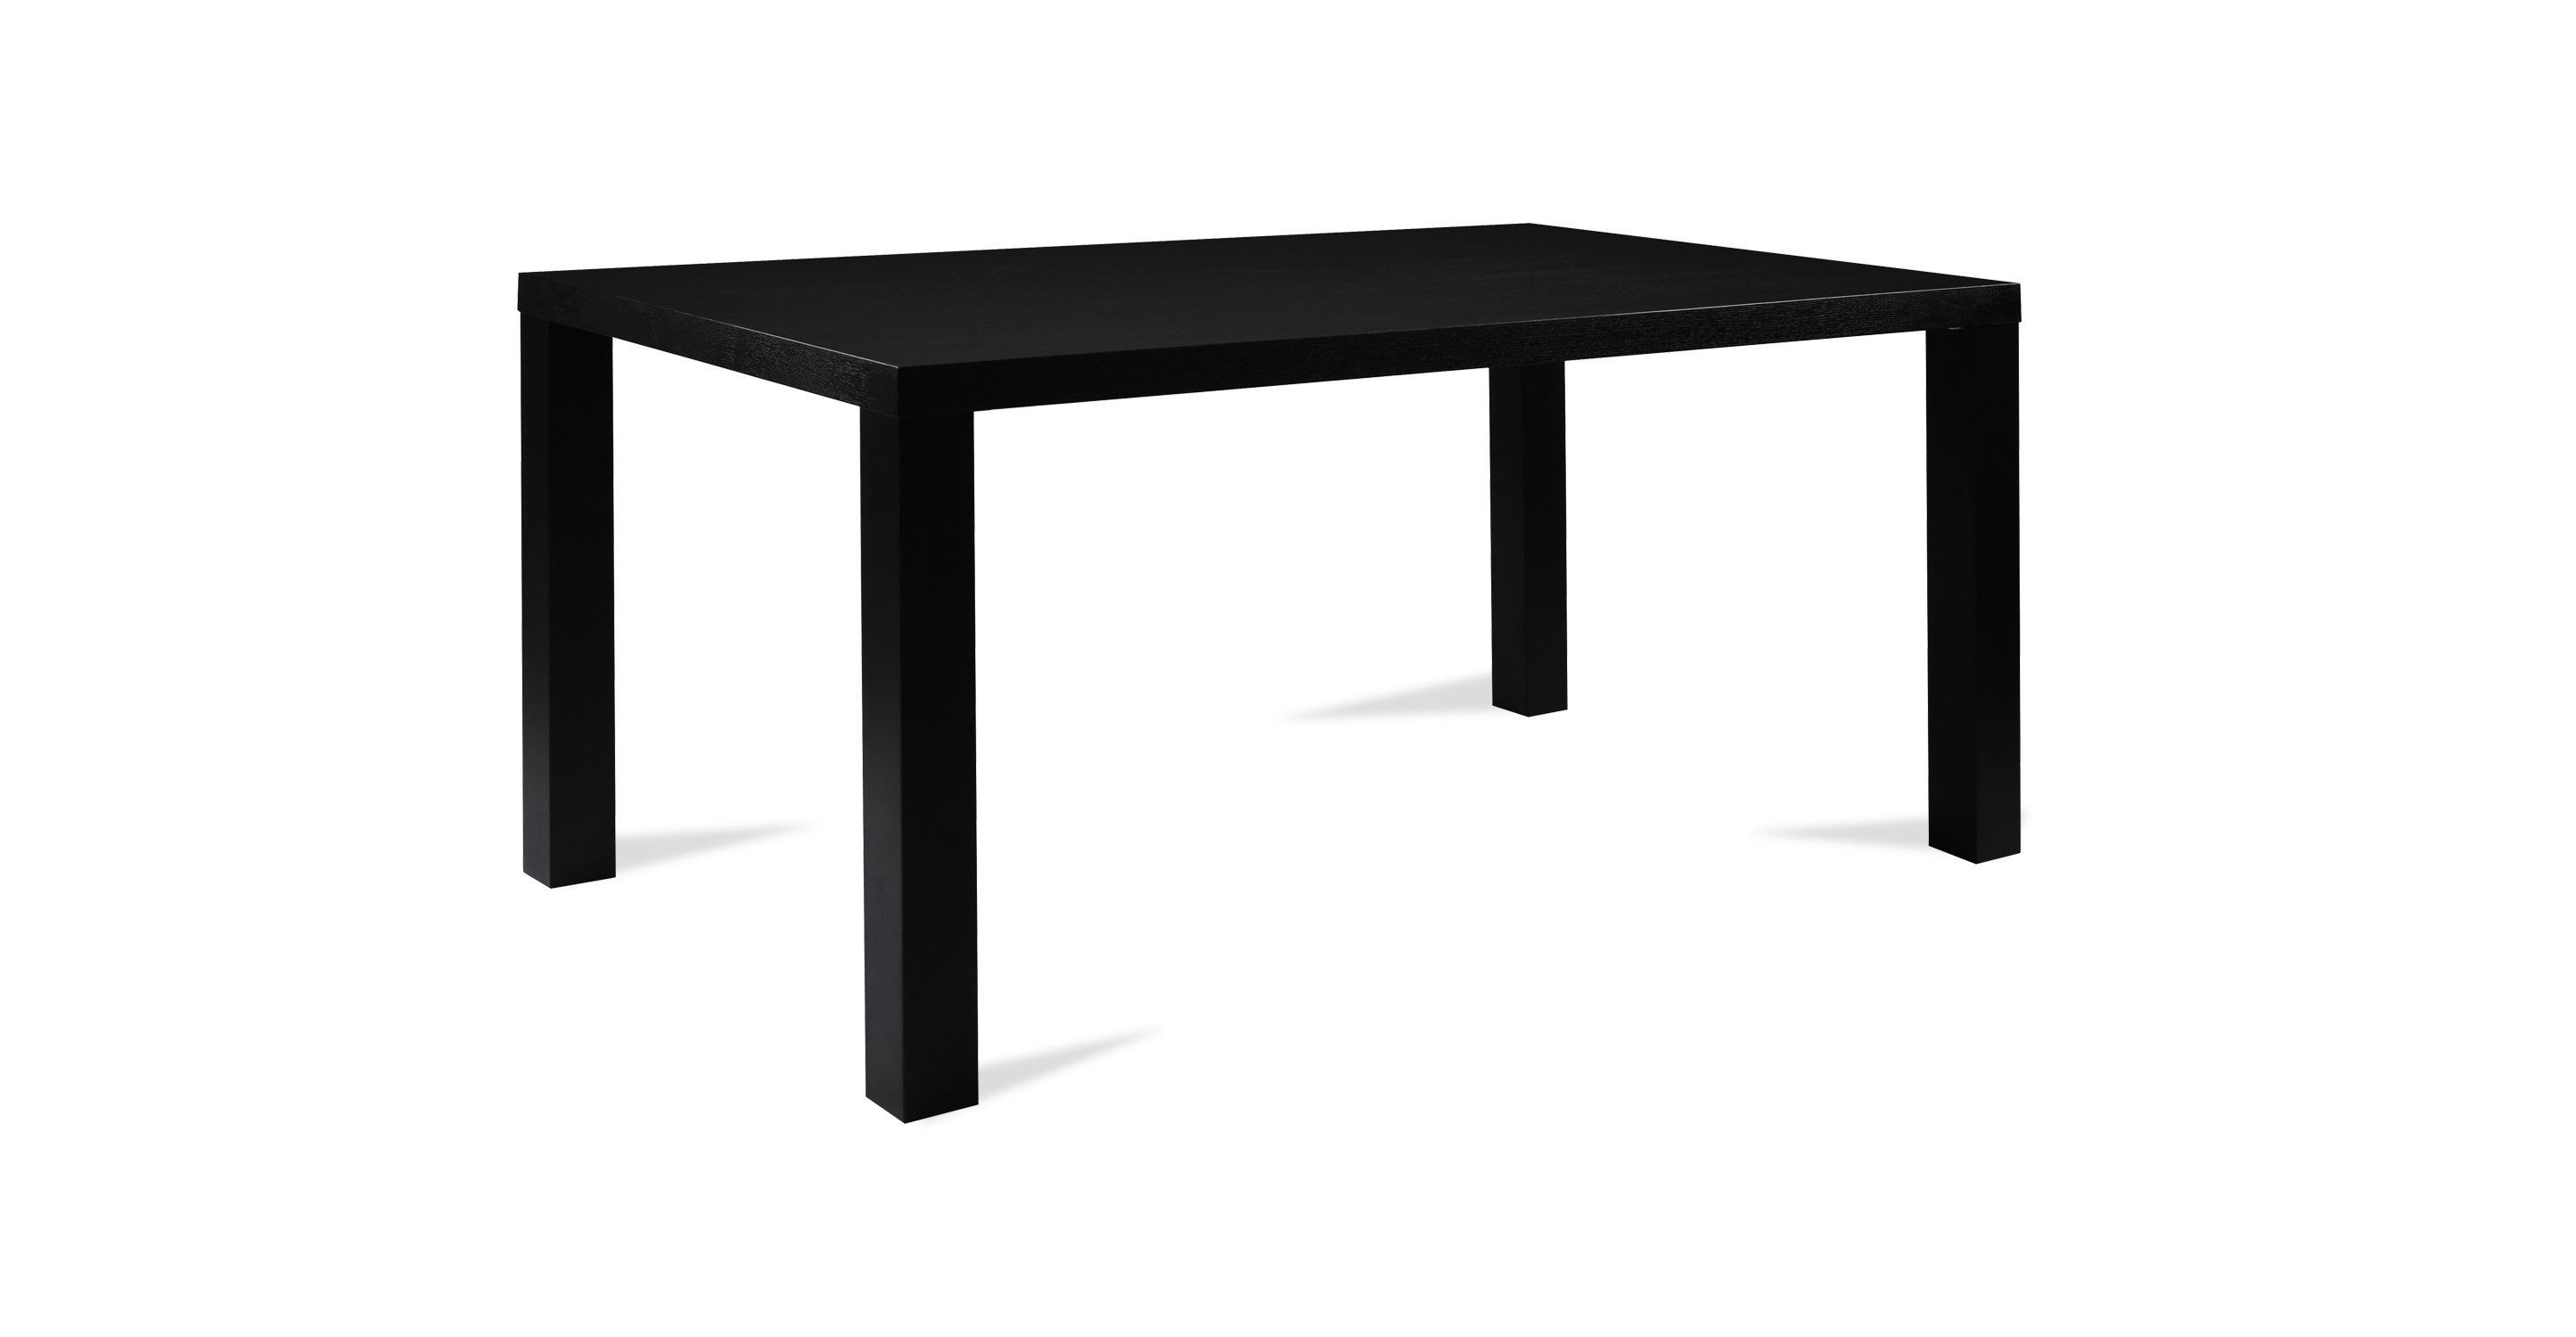 Brent Black Dining Table For 6 - Tables - Article | Modern, Mid-Century ...